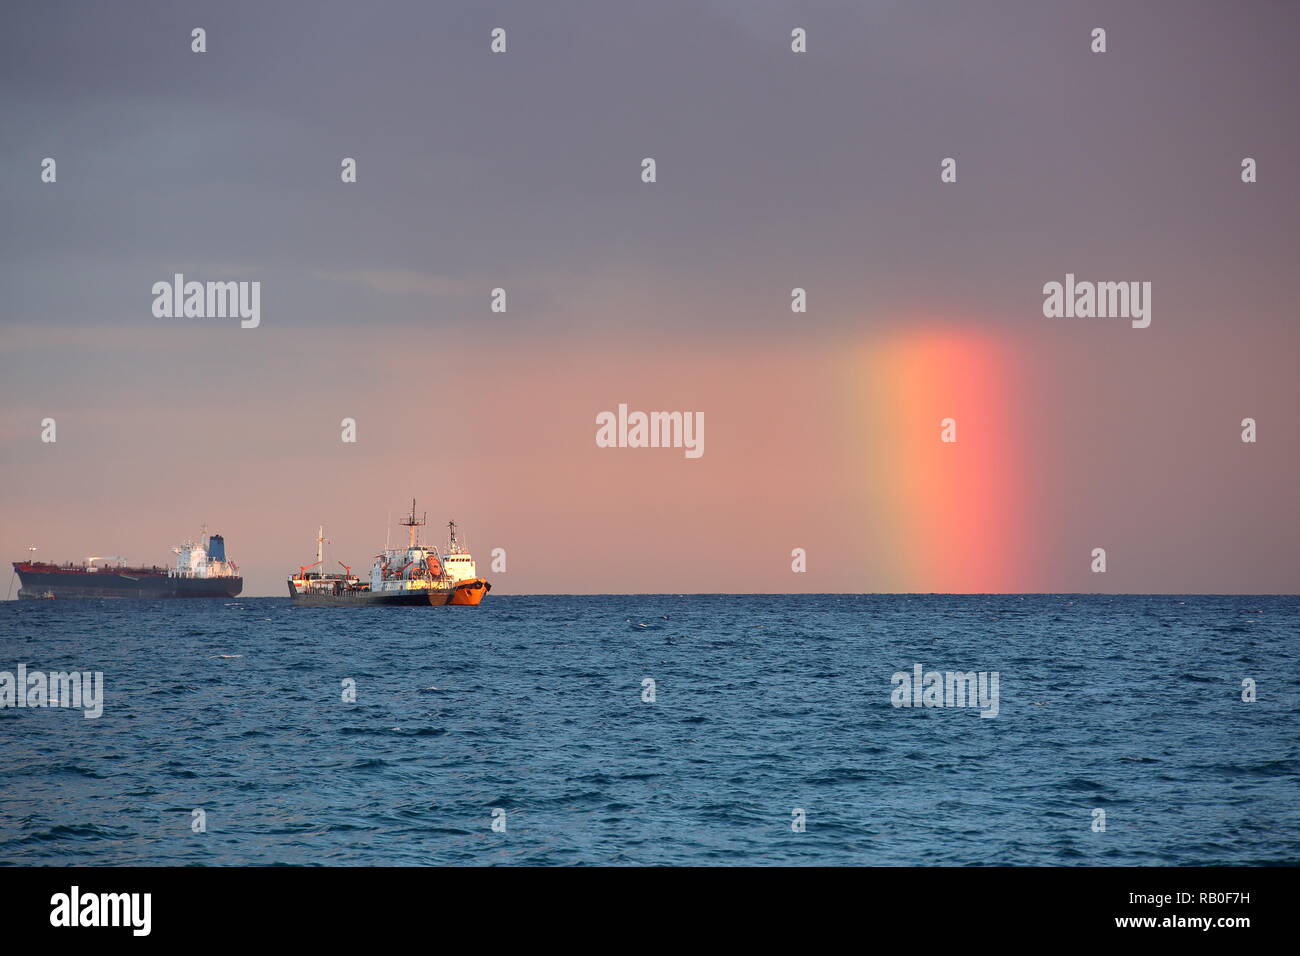 Amazing looking rainbow cut between sea and clouds in sky, two tankers / industrial ships on horizon Stock Photo